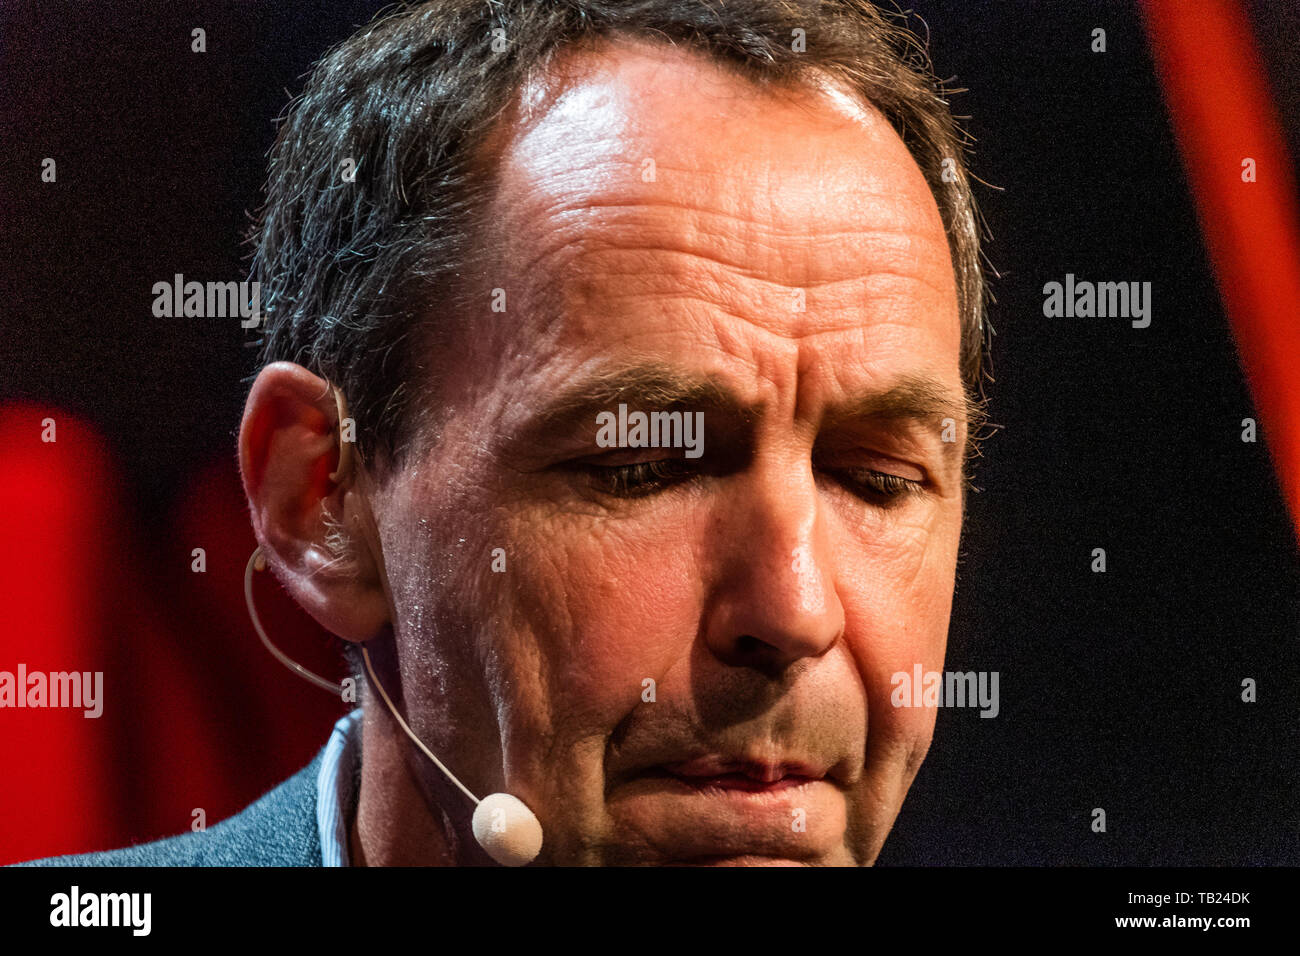 The Hay Festival, Hay on Wye, Wales UK, Wednesday 29th May 2019. Mike Berners-Lee talking about his book ‘THERE IS NO PLANET B: A HANDBOOK FOR THE MAKE OR BREAK YEARS', a call to arms for the looming environmental crisis, at the Hay Festival 2019 Photo Credit: keith morris/Alamy Live News Stock Photo